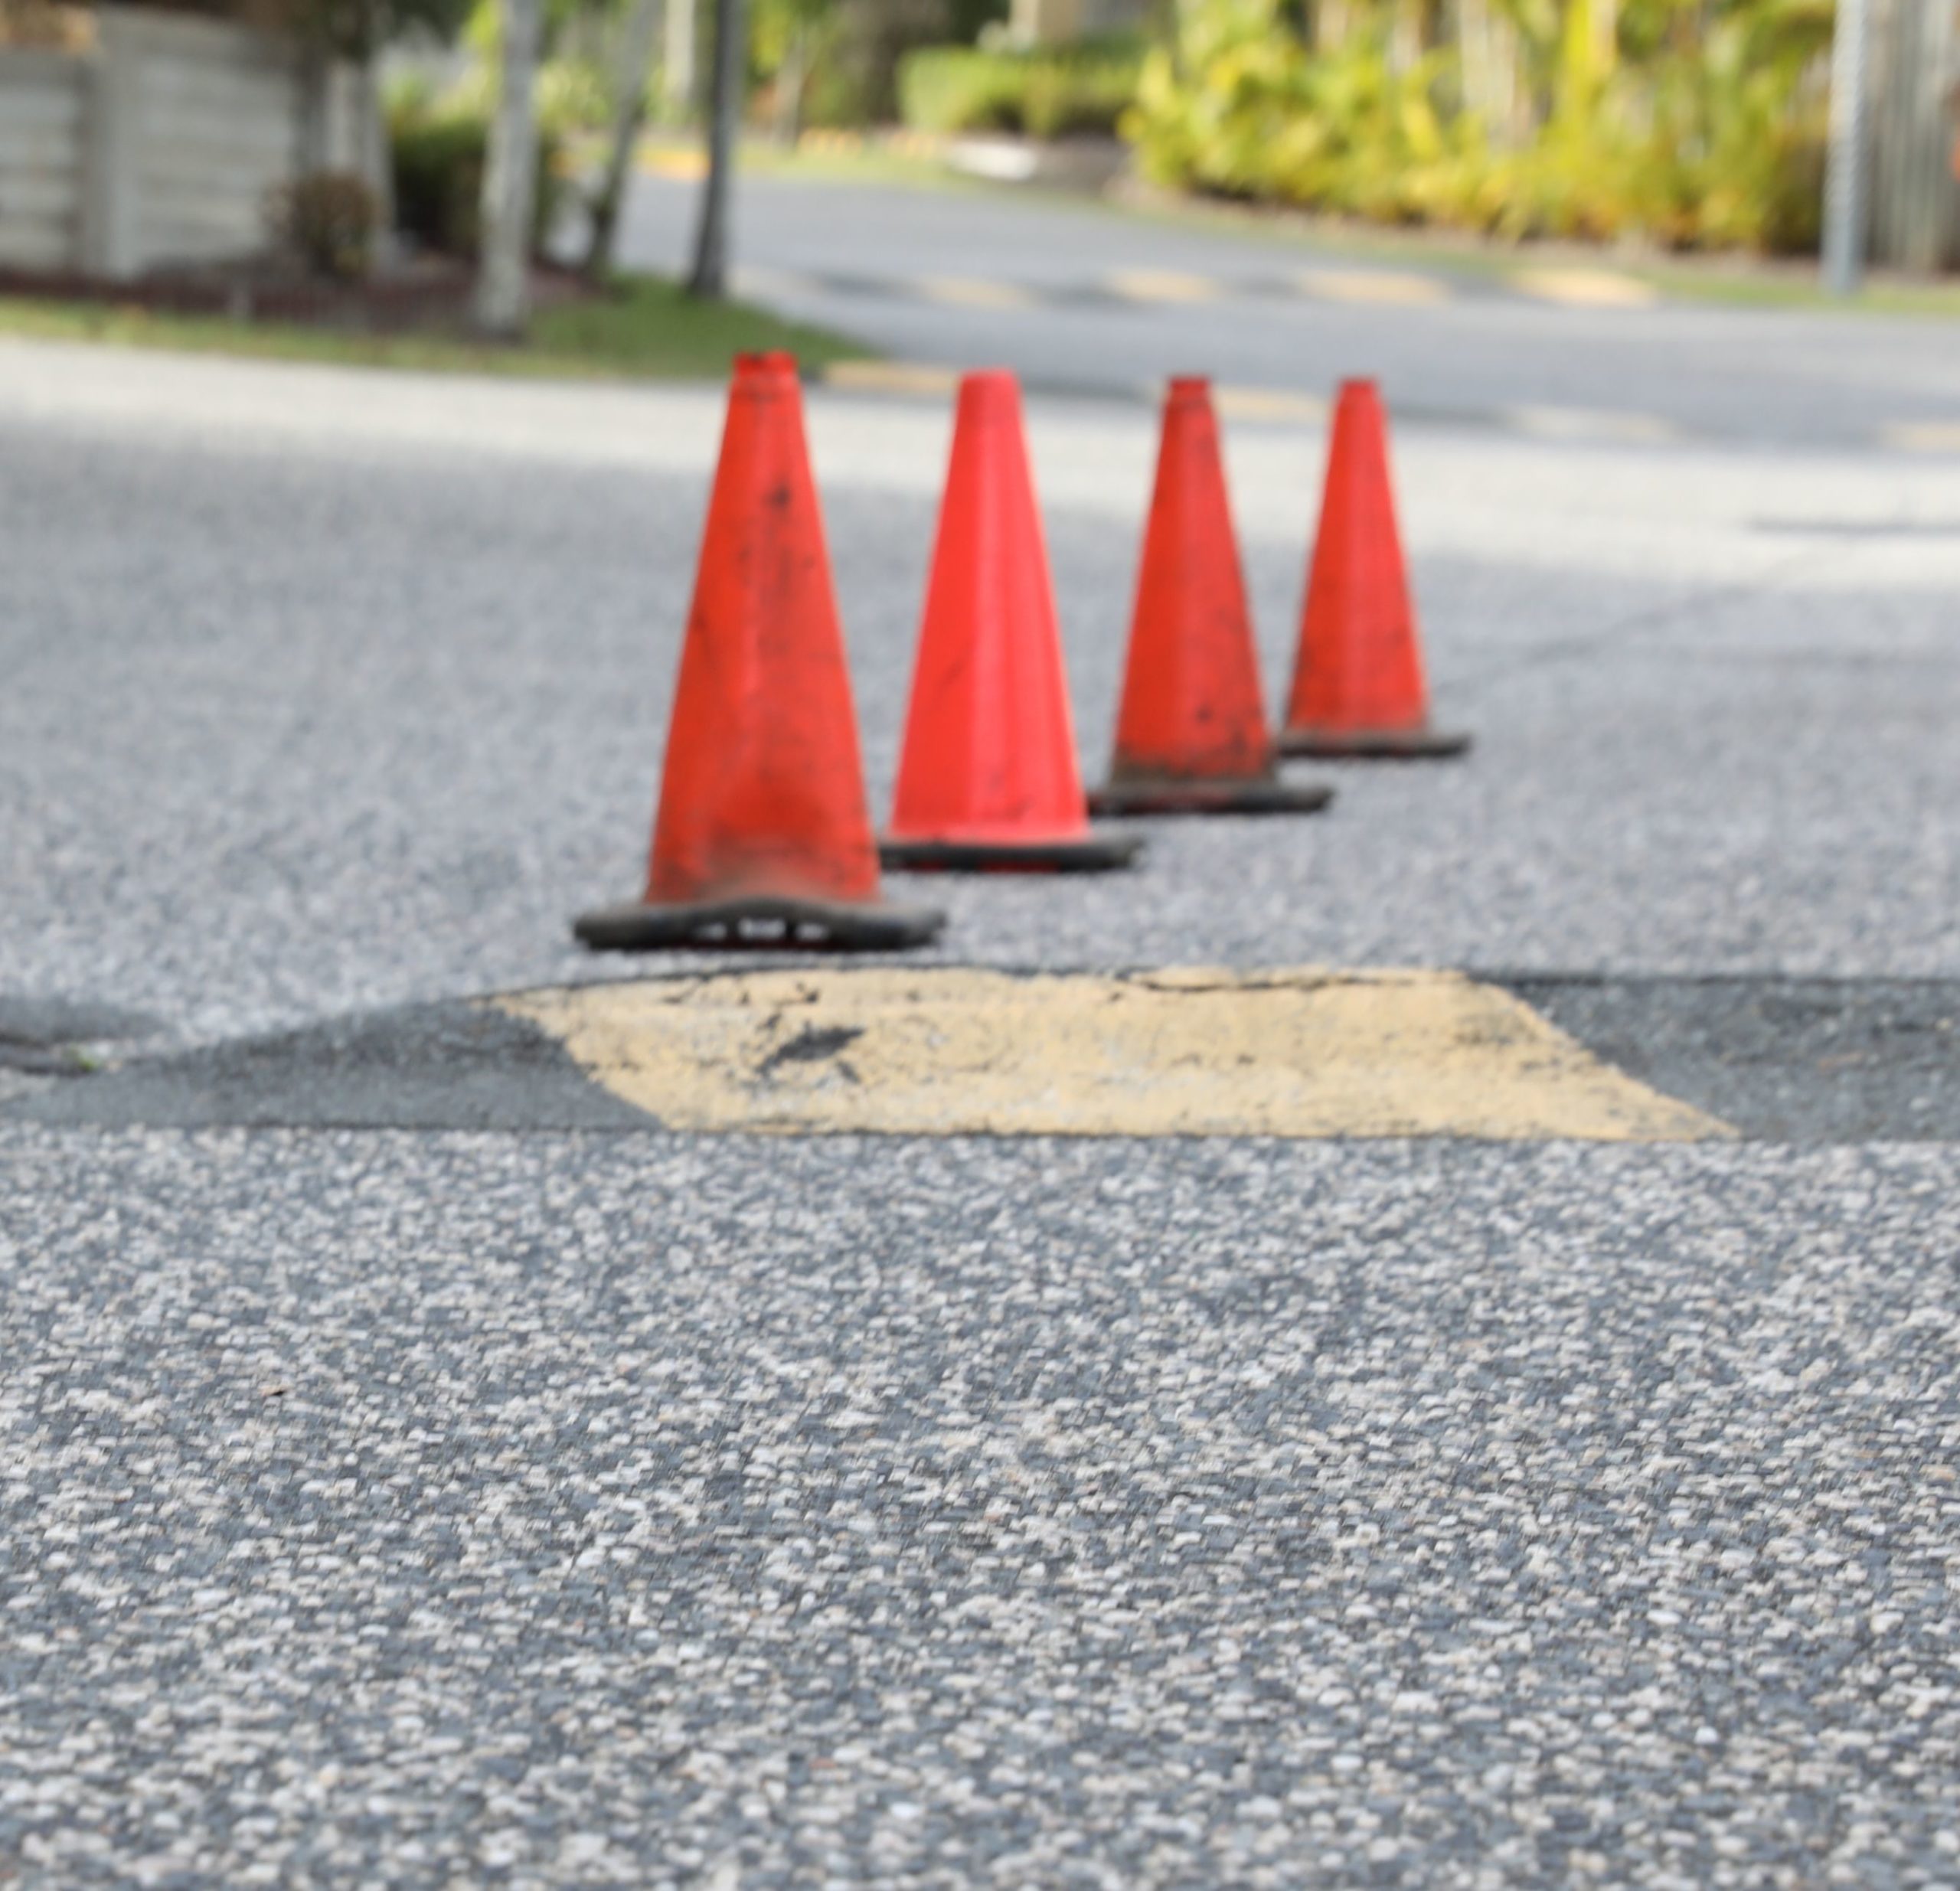 Residential street with cones laid out near a speed bump